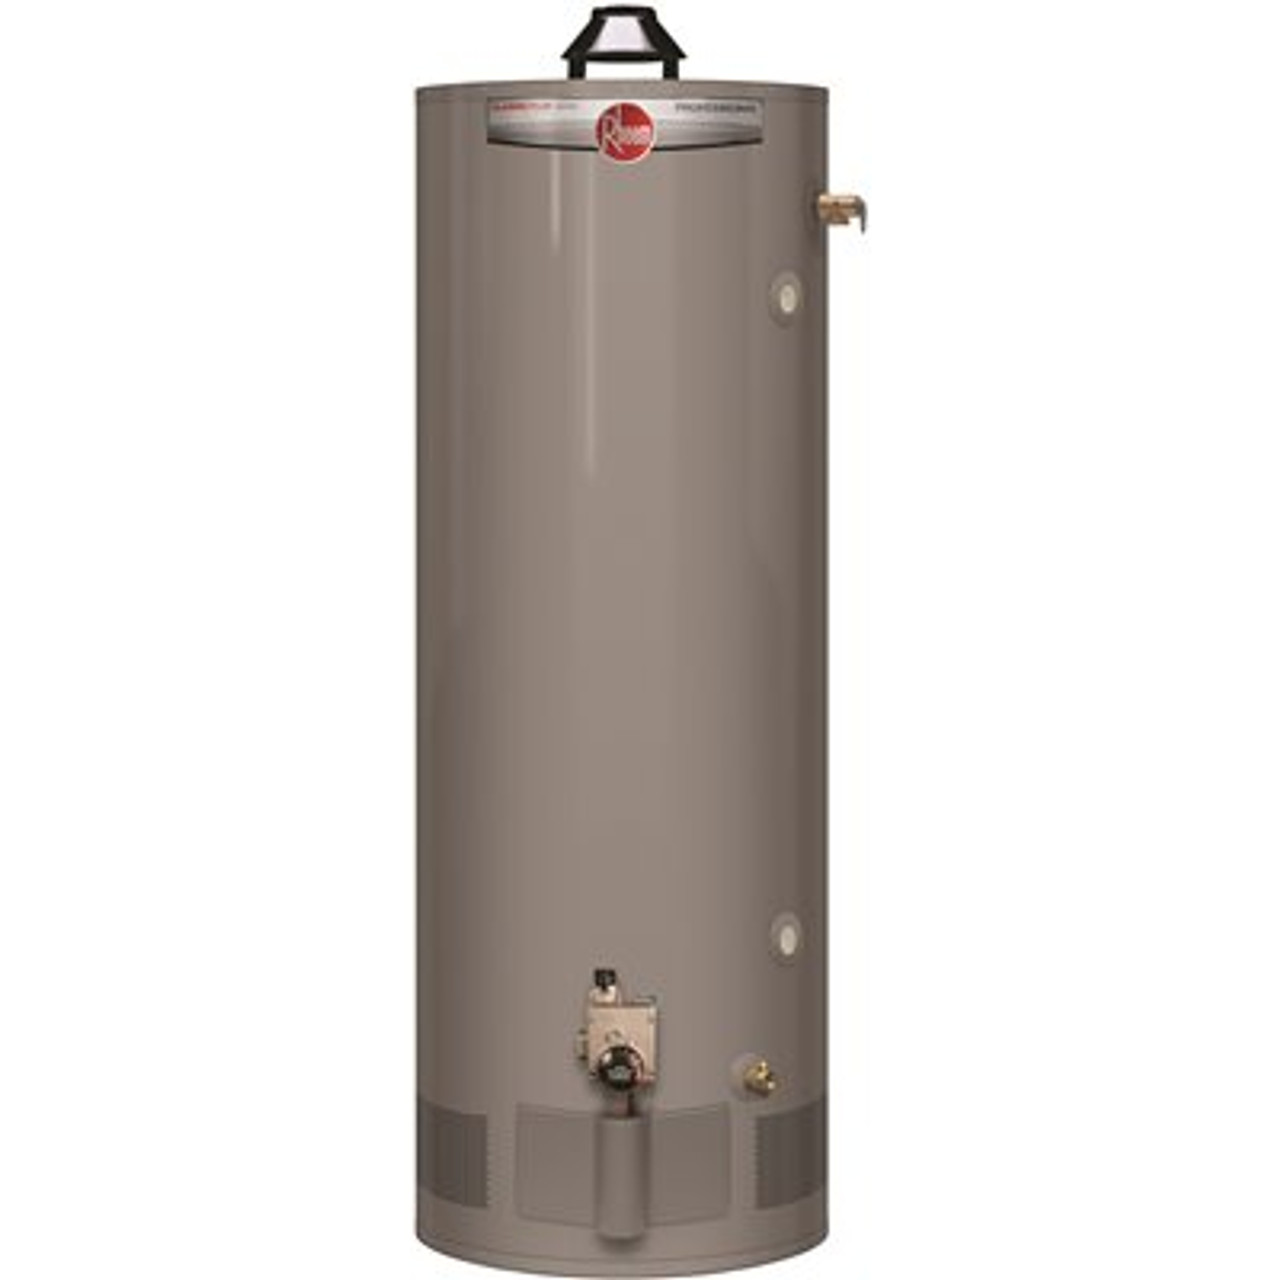 Rheem Pro-Classic Plus 50 gal. Tall 8-Year Warranty Residential Natural Gas Water Heater